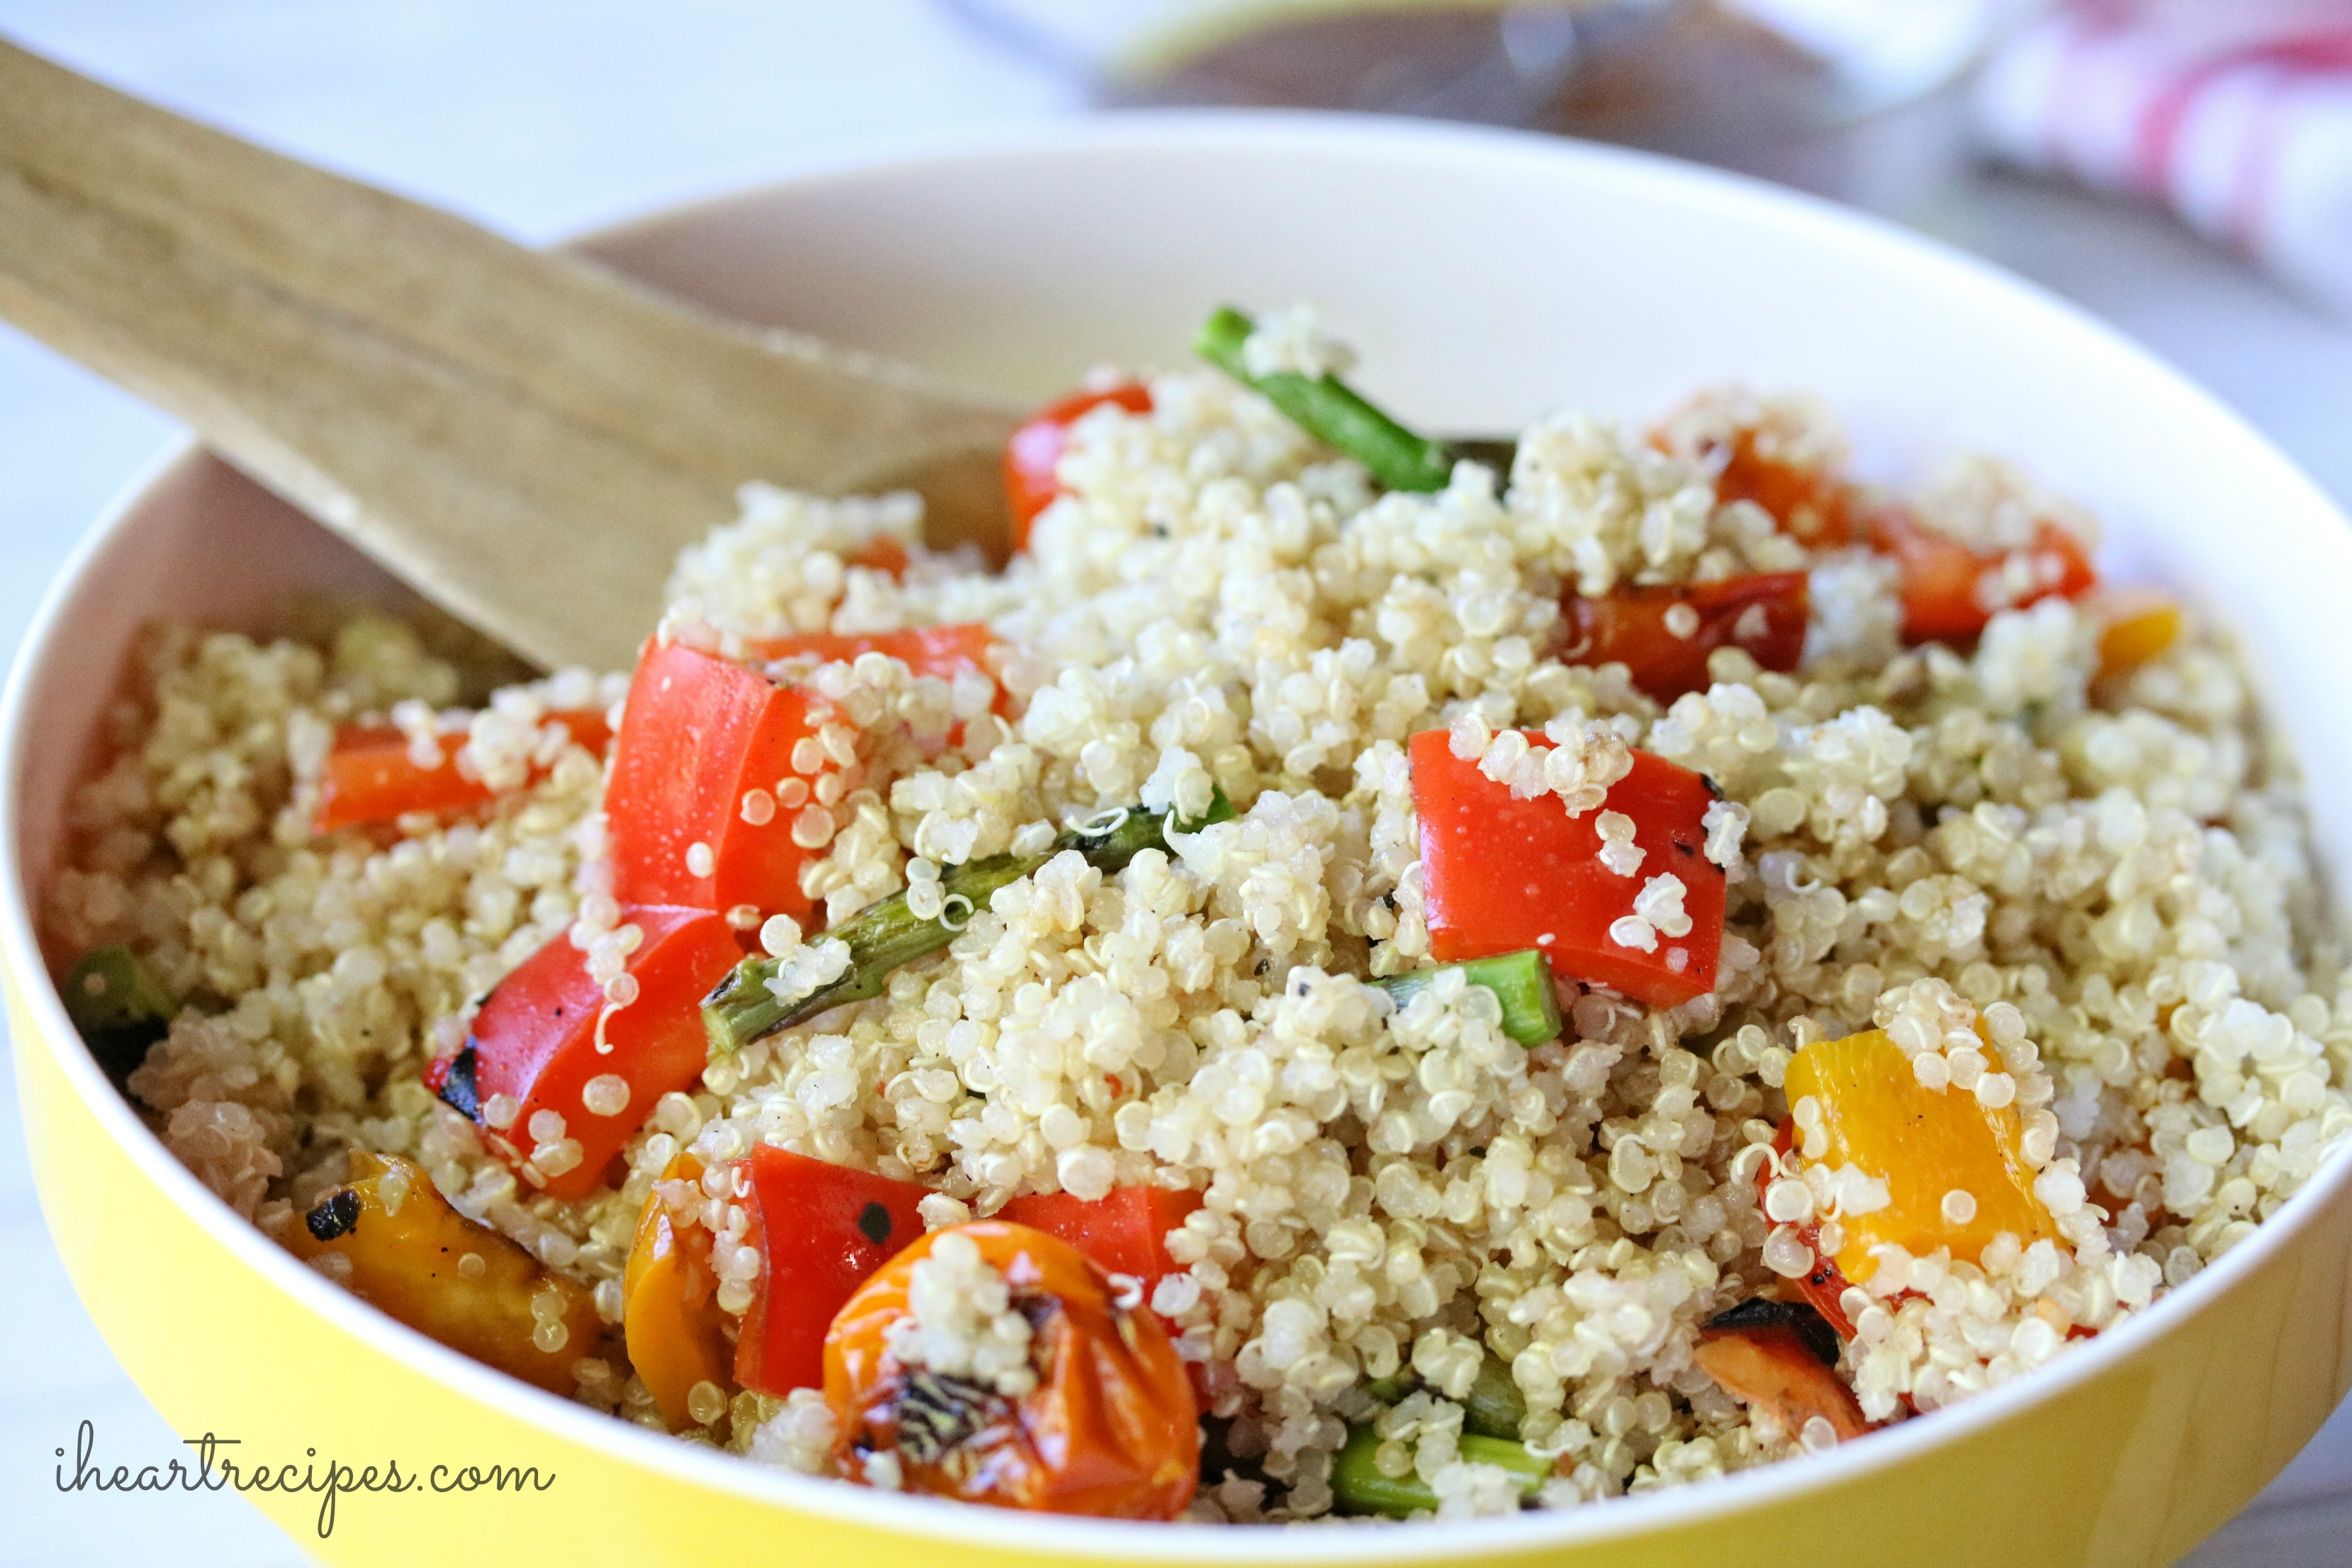 Quinoa is the star ingredient, but these grilled veggies add a ton of savory flavor